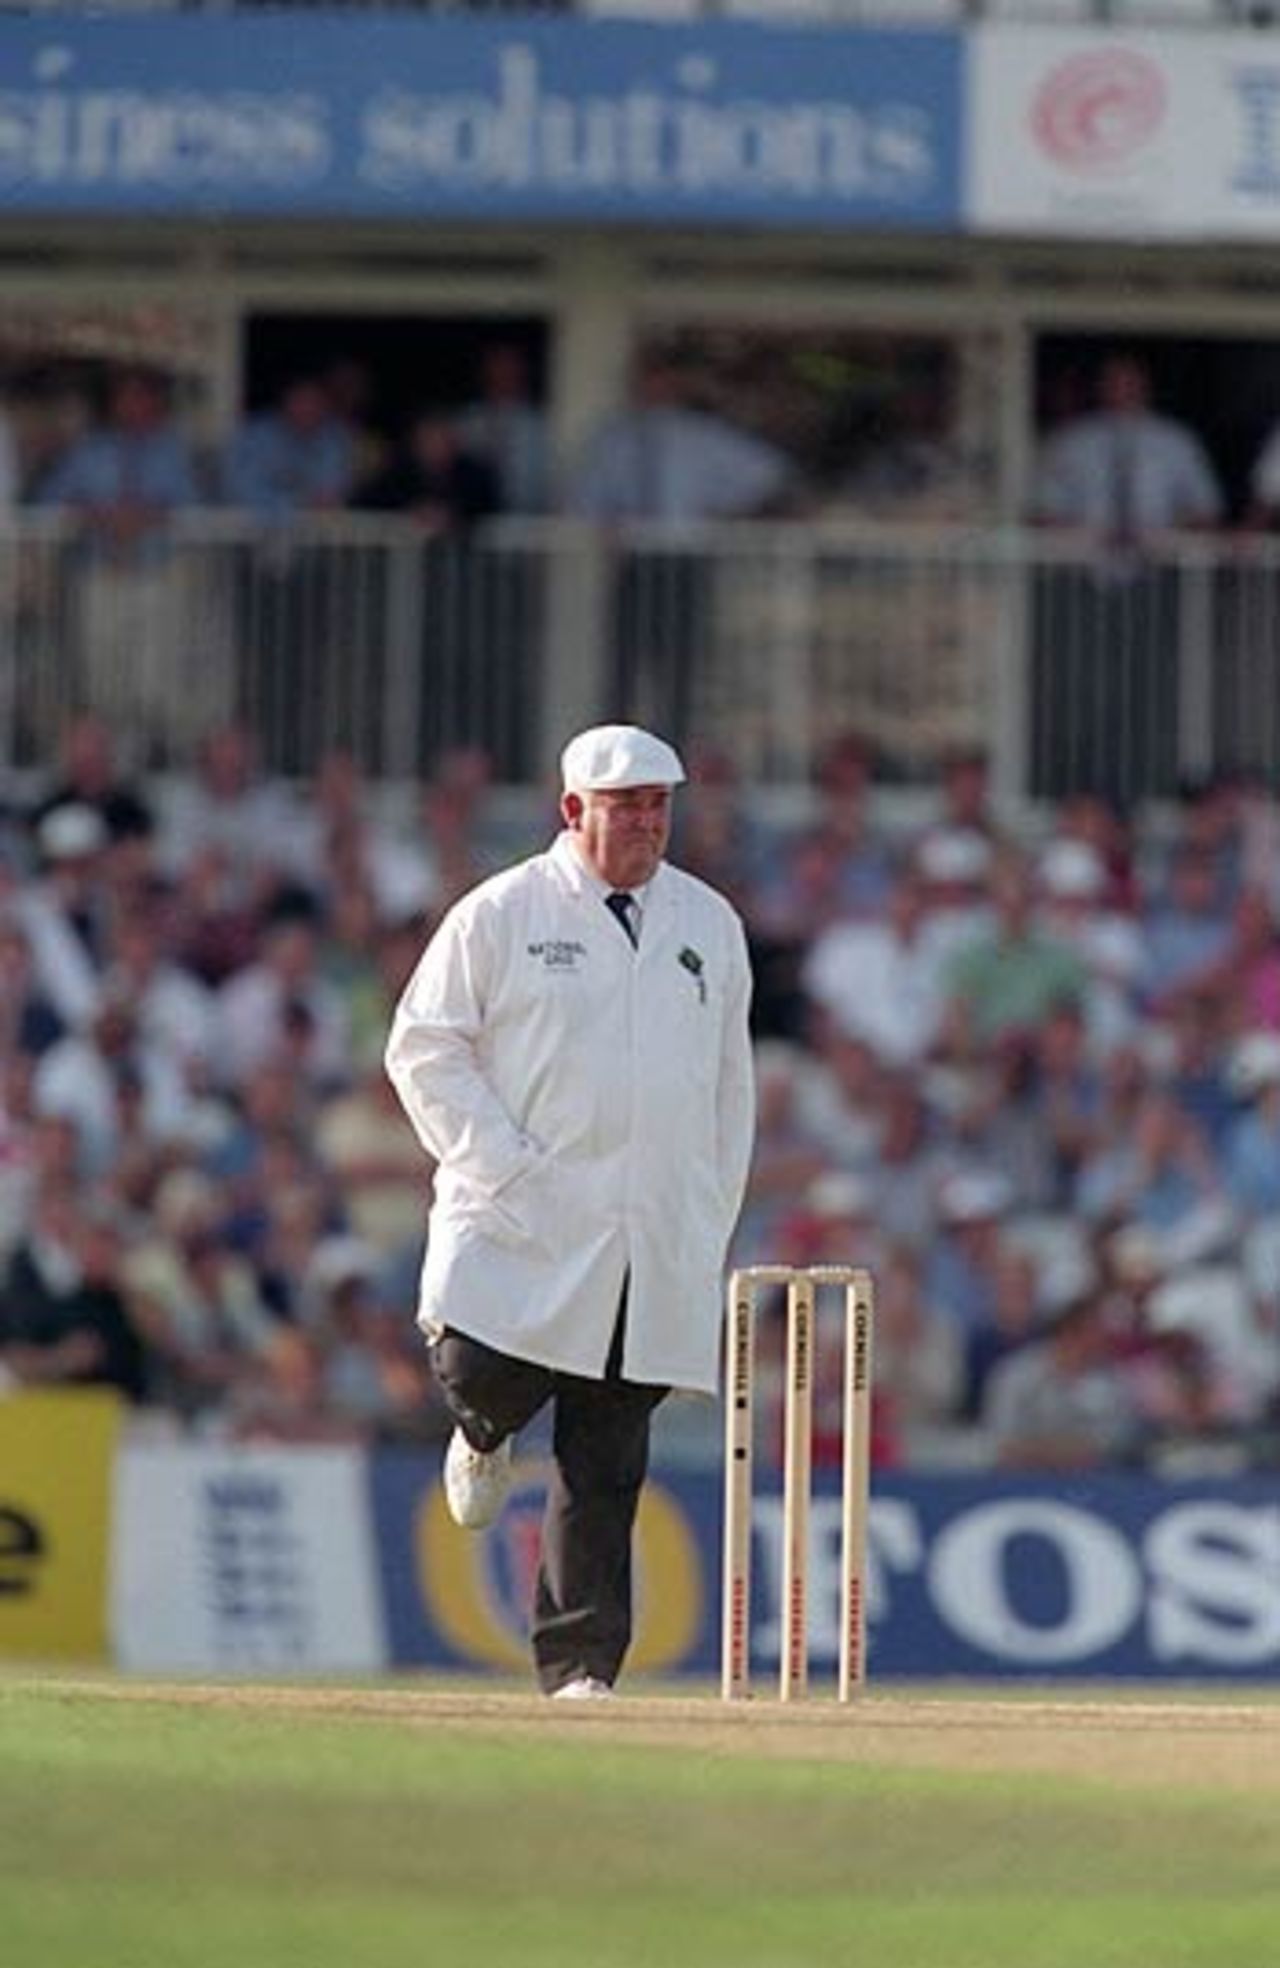 Time for the jig at Nelson. Shepherd performs his superstitious routine
during a Test between England and Sri Lanka at The Oval, August 27, 1998.
